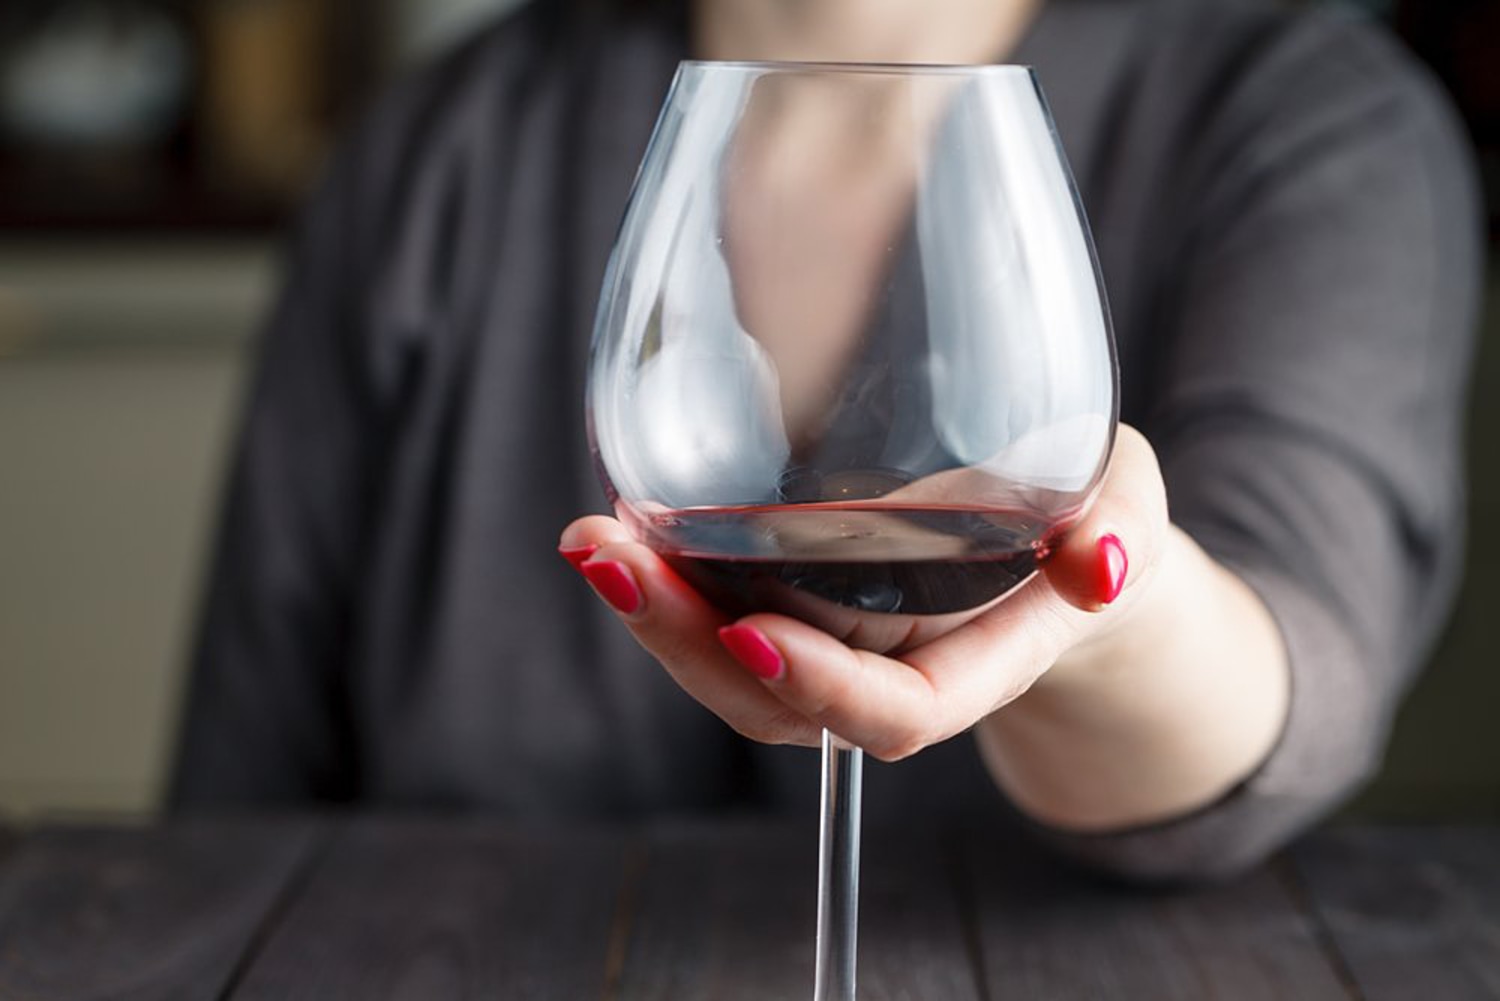 Wine tasting can work the brain more than math, according to neuroscience